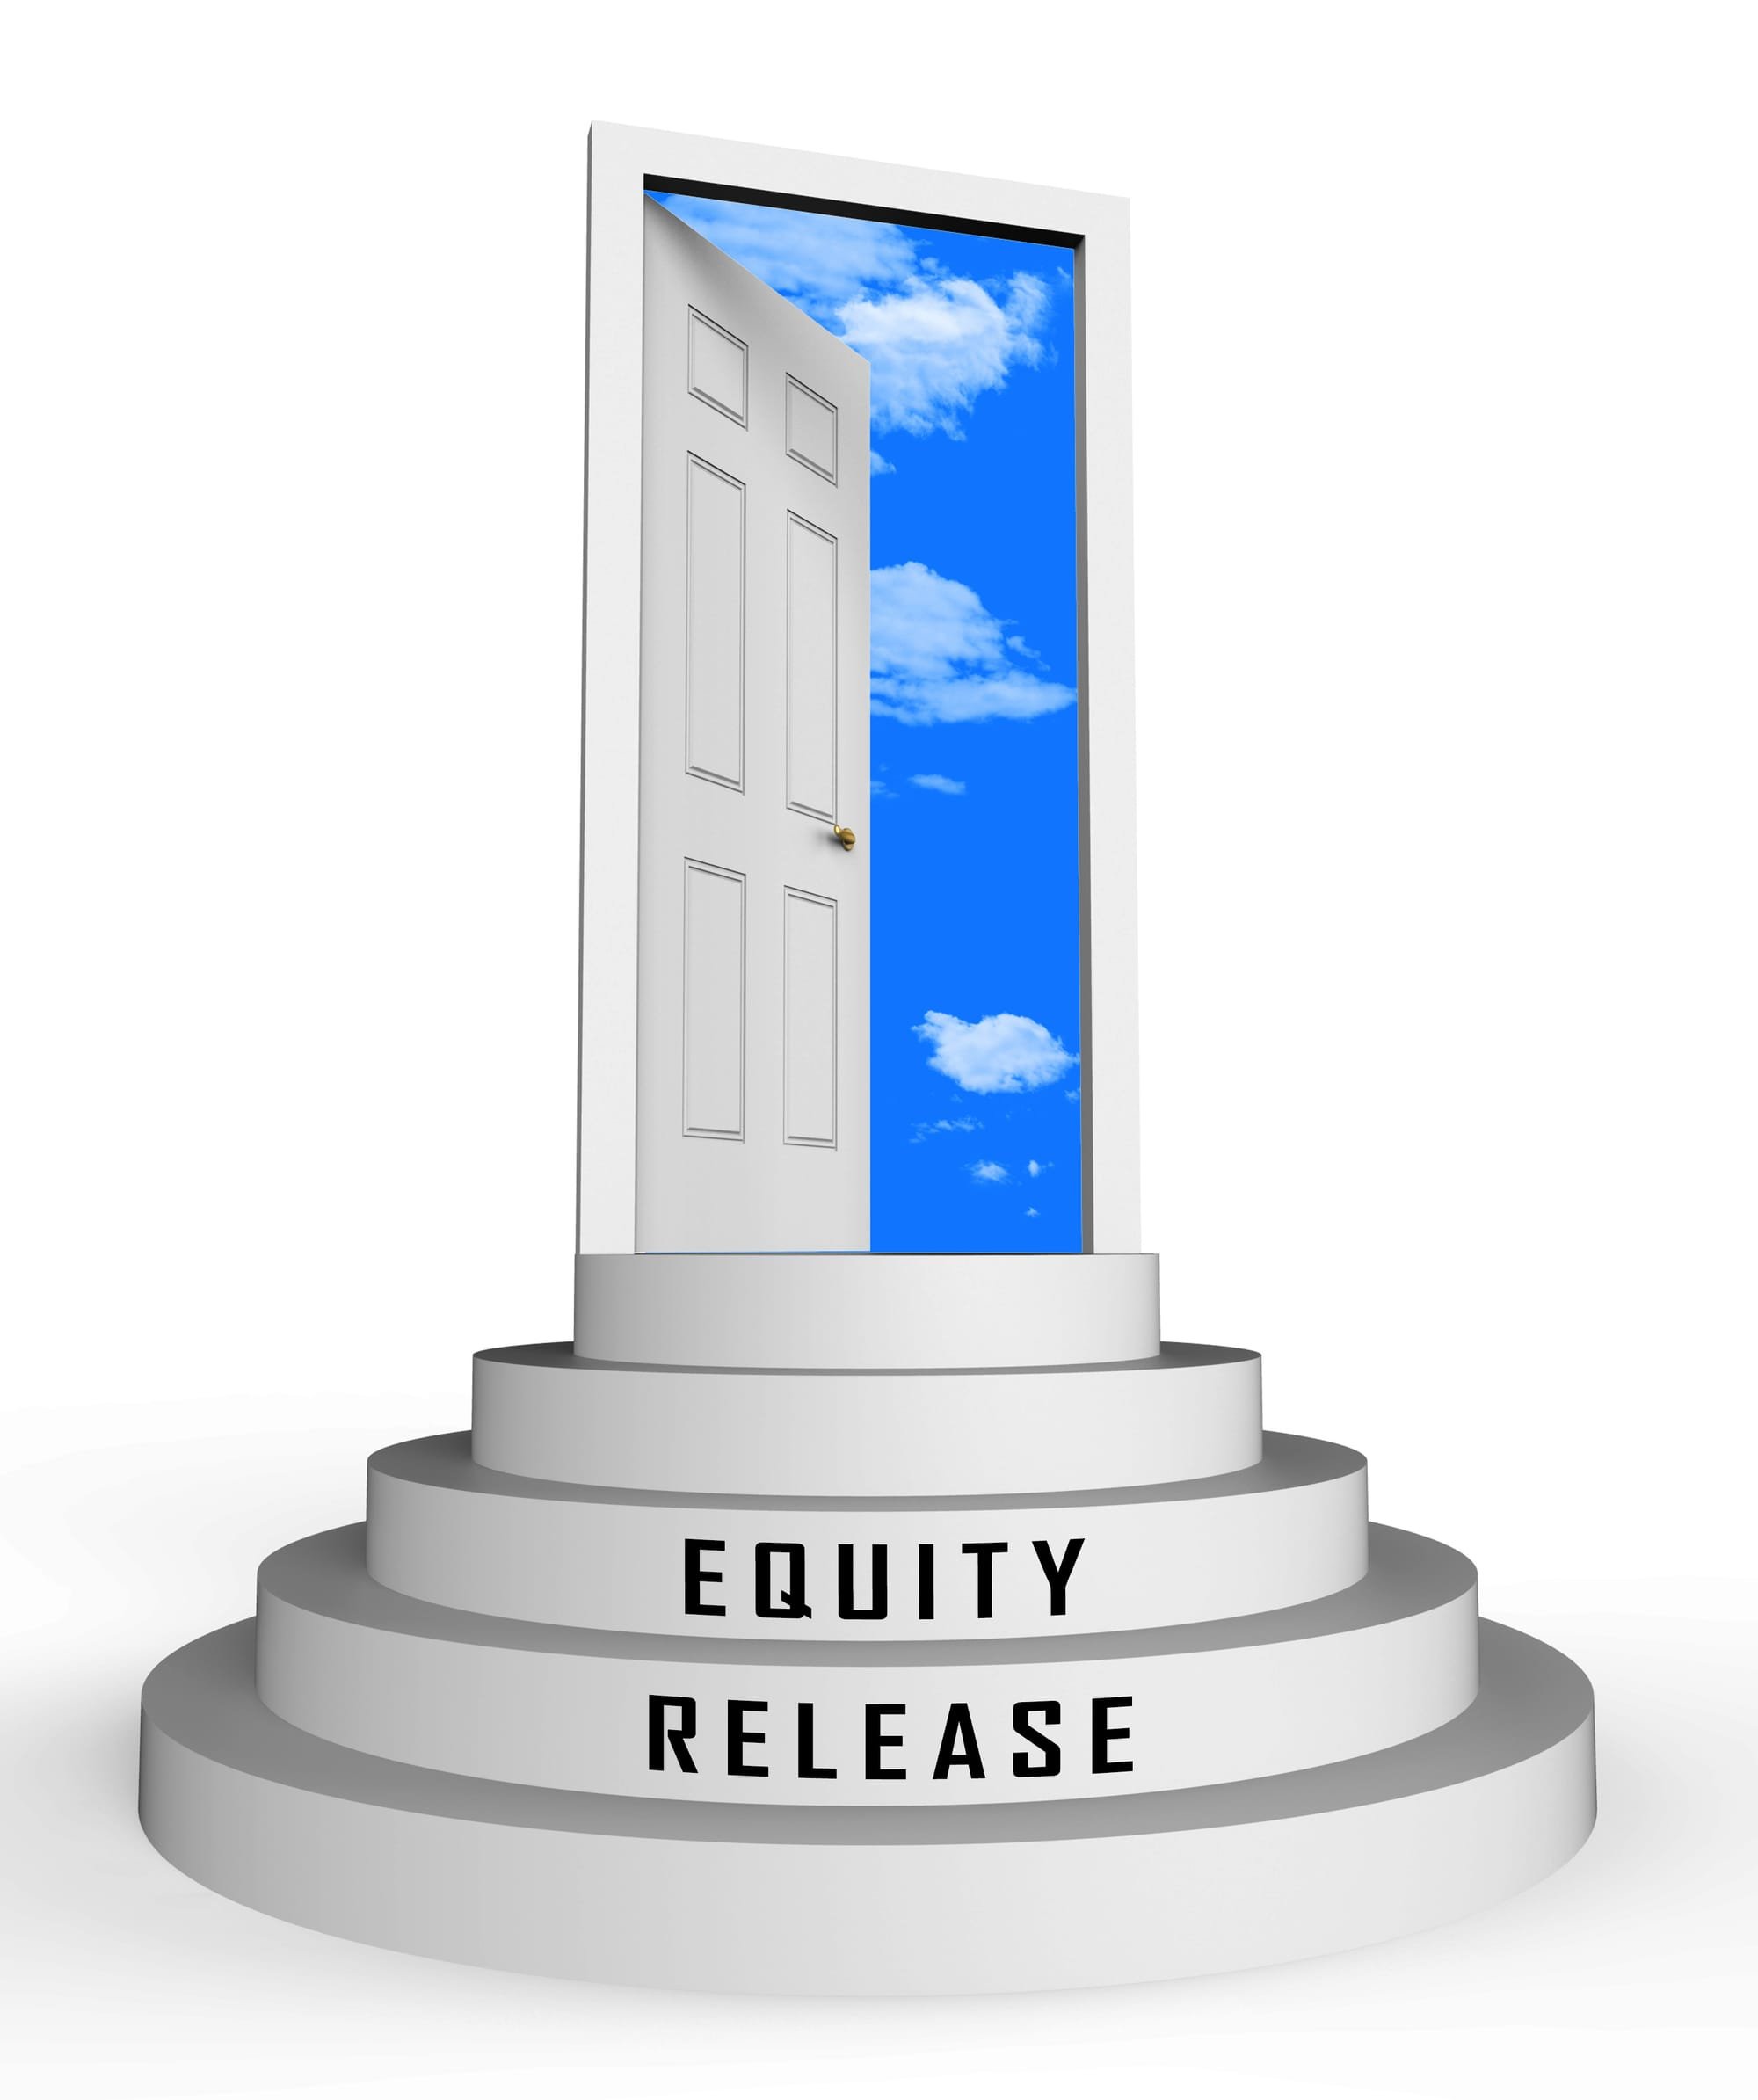 Equity Release (April 2020)